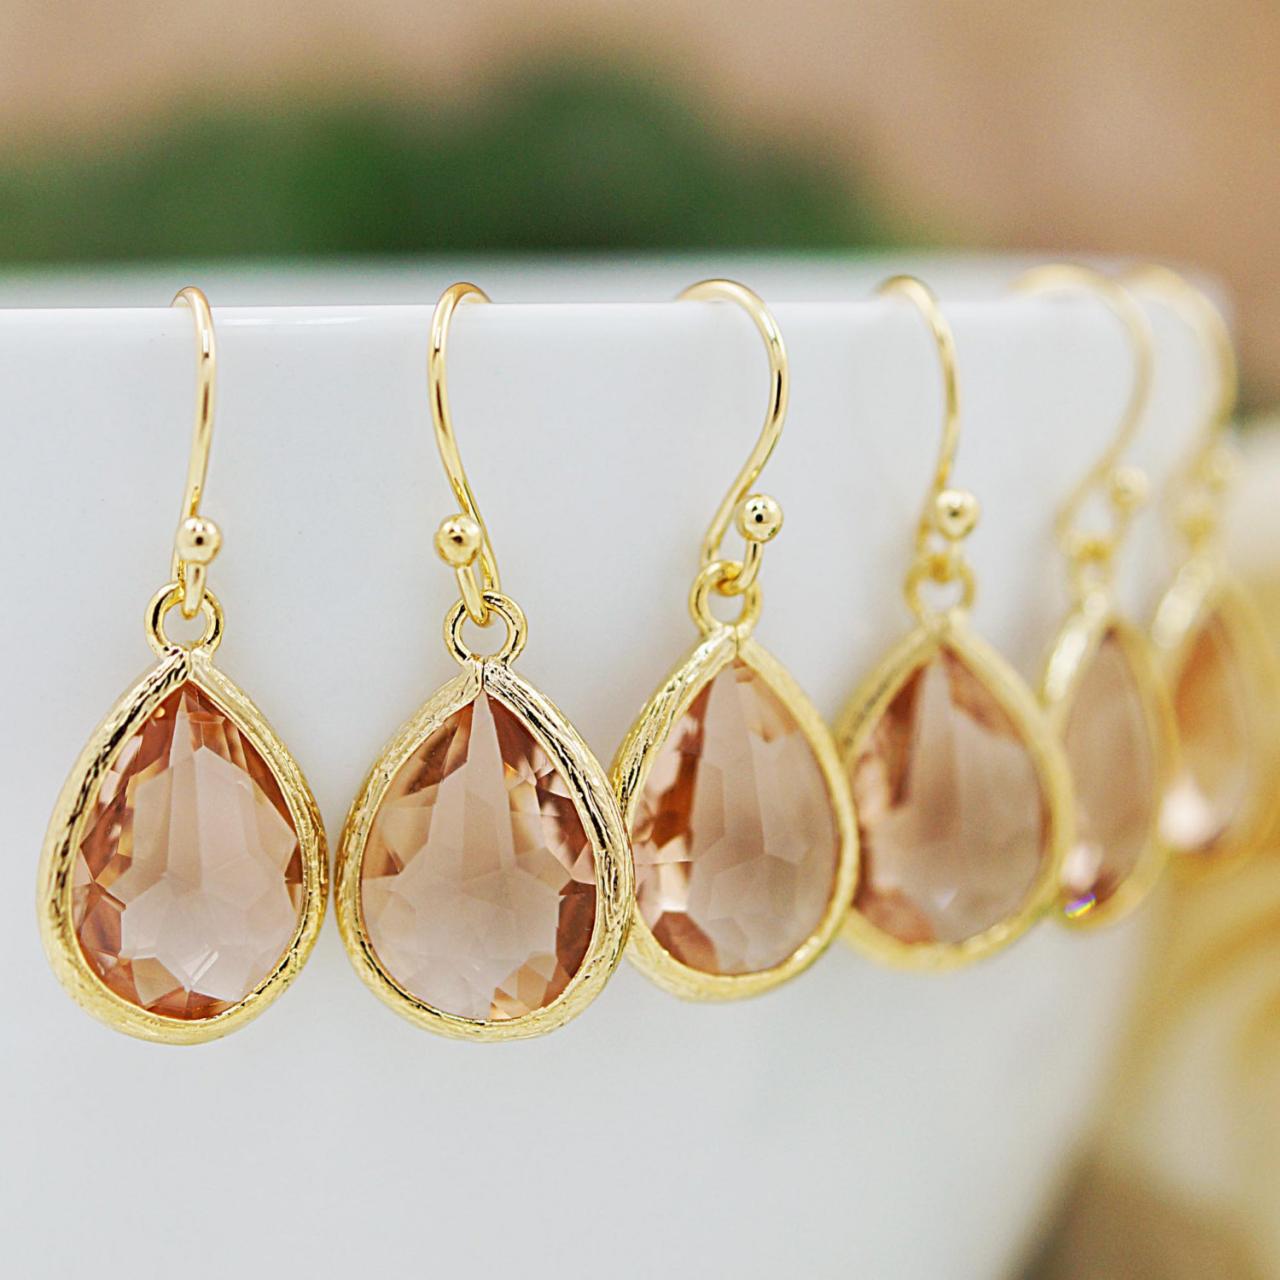 Bridesmaid gifts Bridesmaid Earrings Wedding gift Peach Glass drops dangle earrings Everyday gift for her Christmas gift under 20